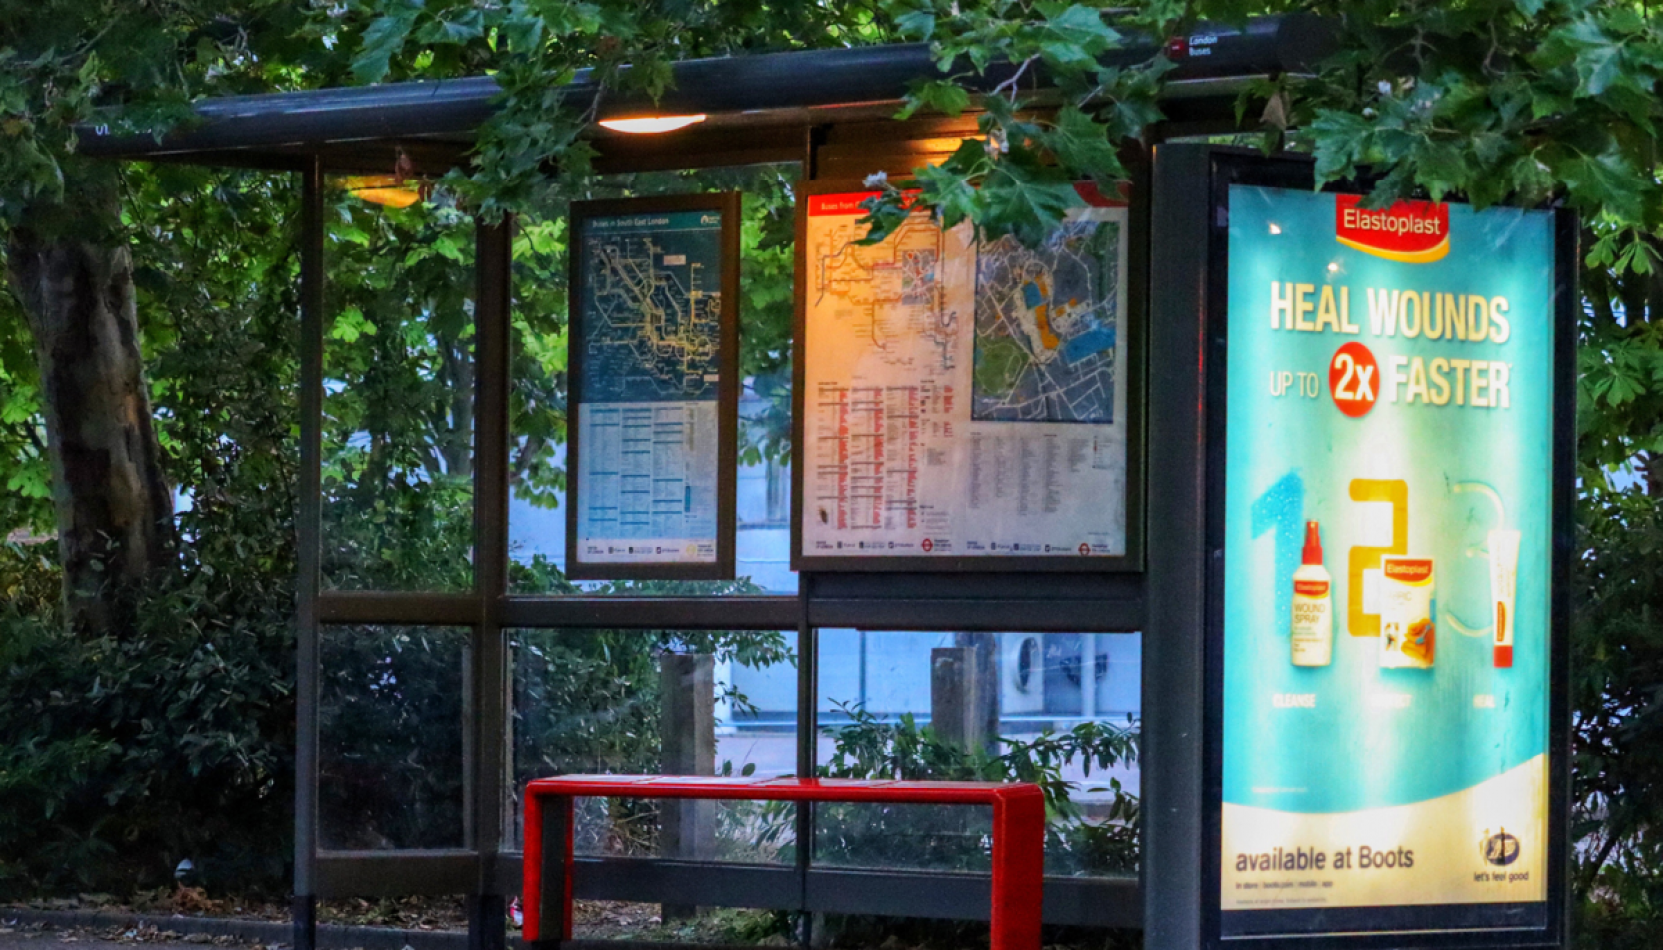 bus stop, bus stops, bus service, surrey, investment, better bus service, why live in surrey, living fun surrey, surrey life, move to Surrey, guide to surrey, whats on, whats on in surrey, surrey buses, surrey bus stop, surrey buses investment,